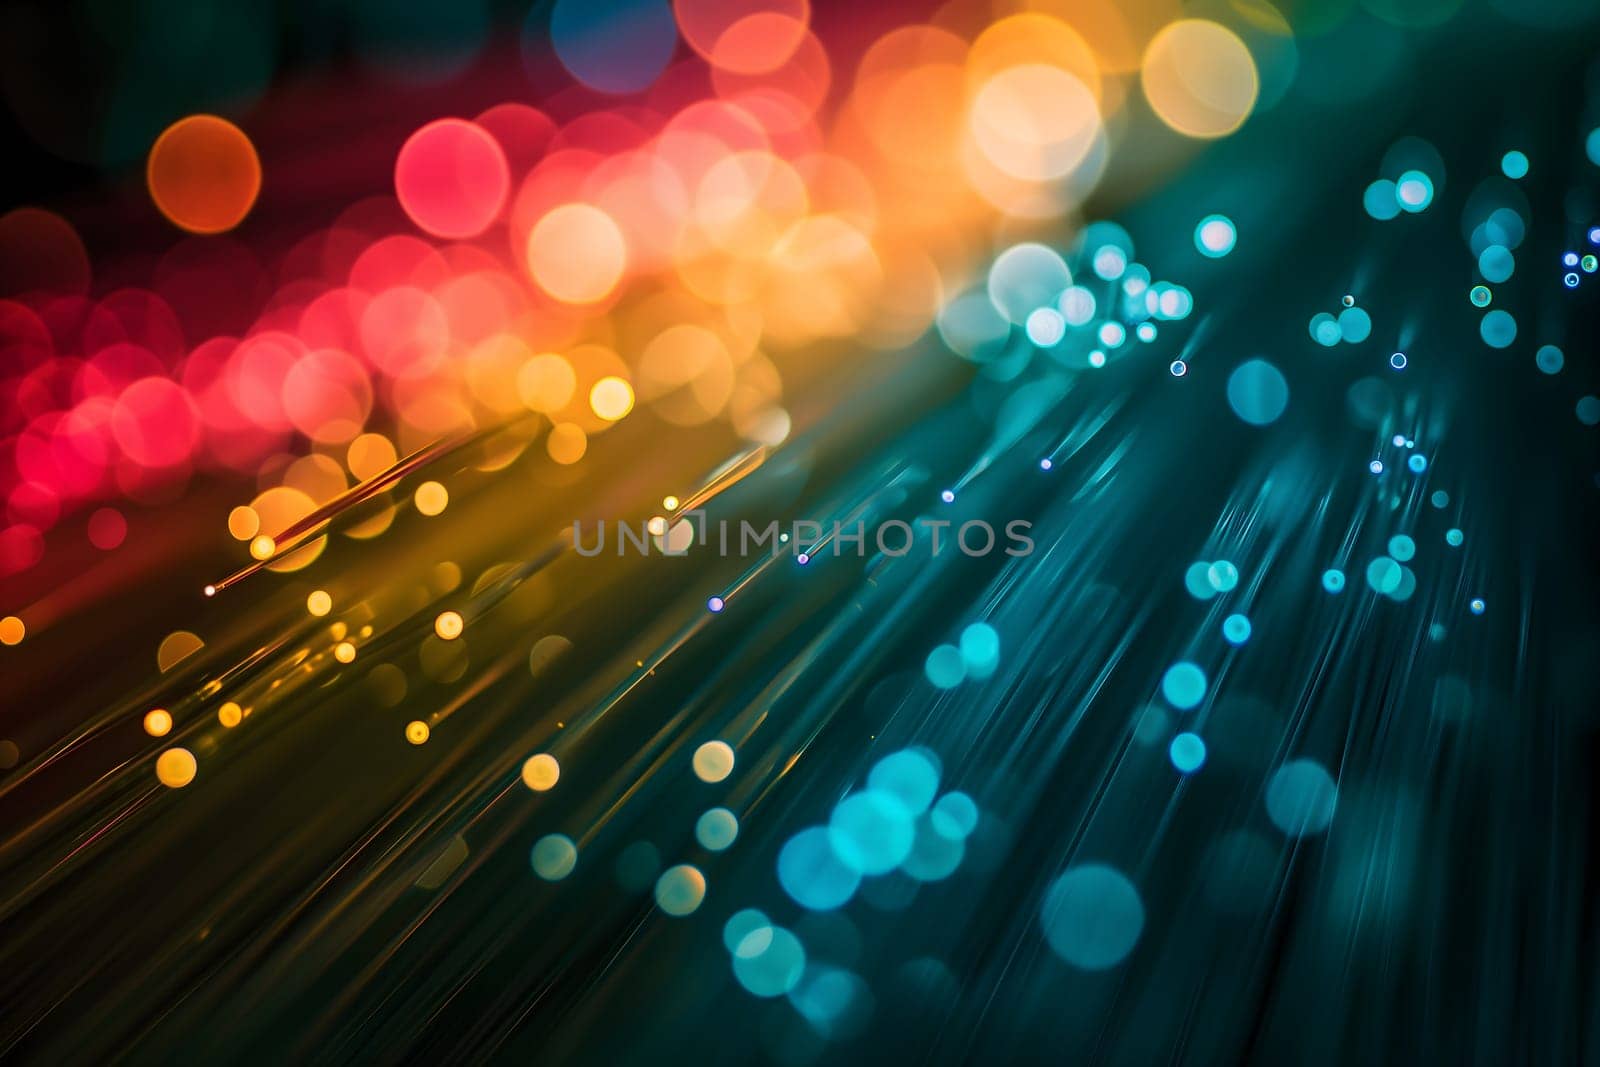 Abstract colorful fiber optic high speed data transfer background and wallpaper. Neural network generated image. Not based on any actual scene or pattern.